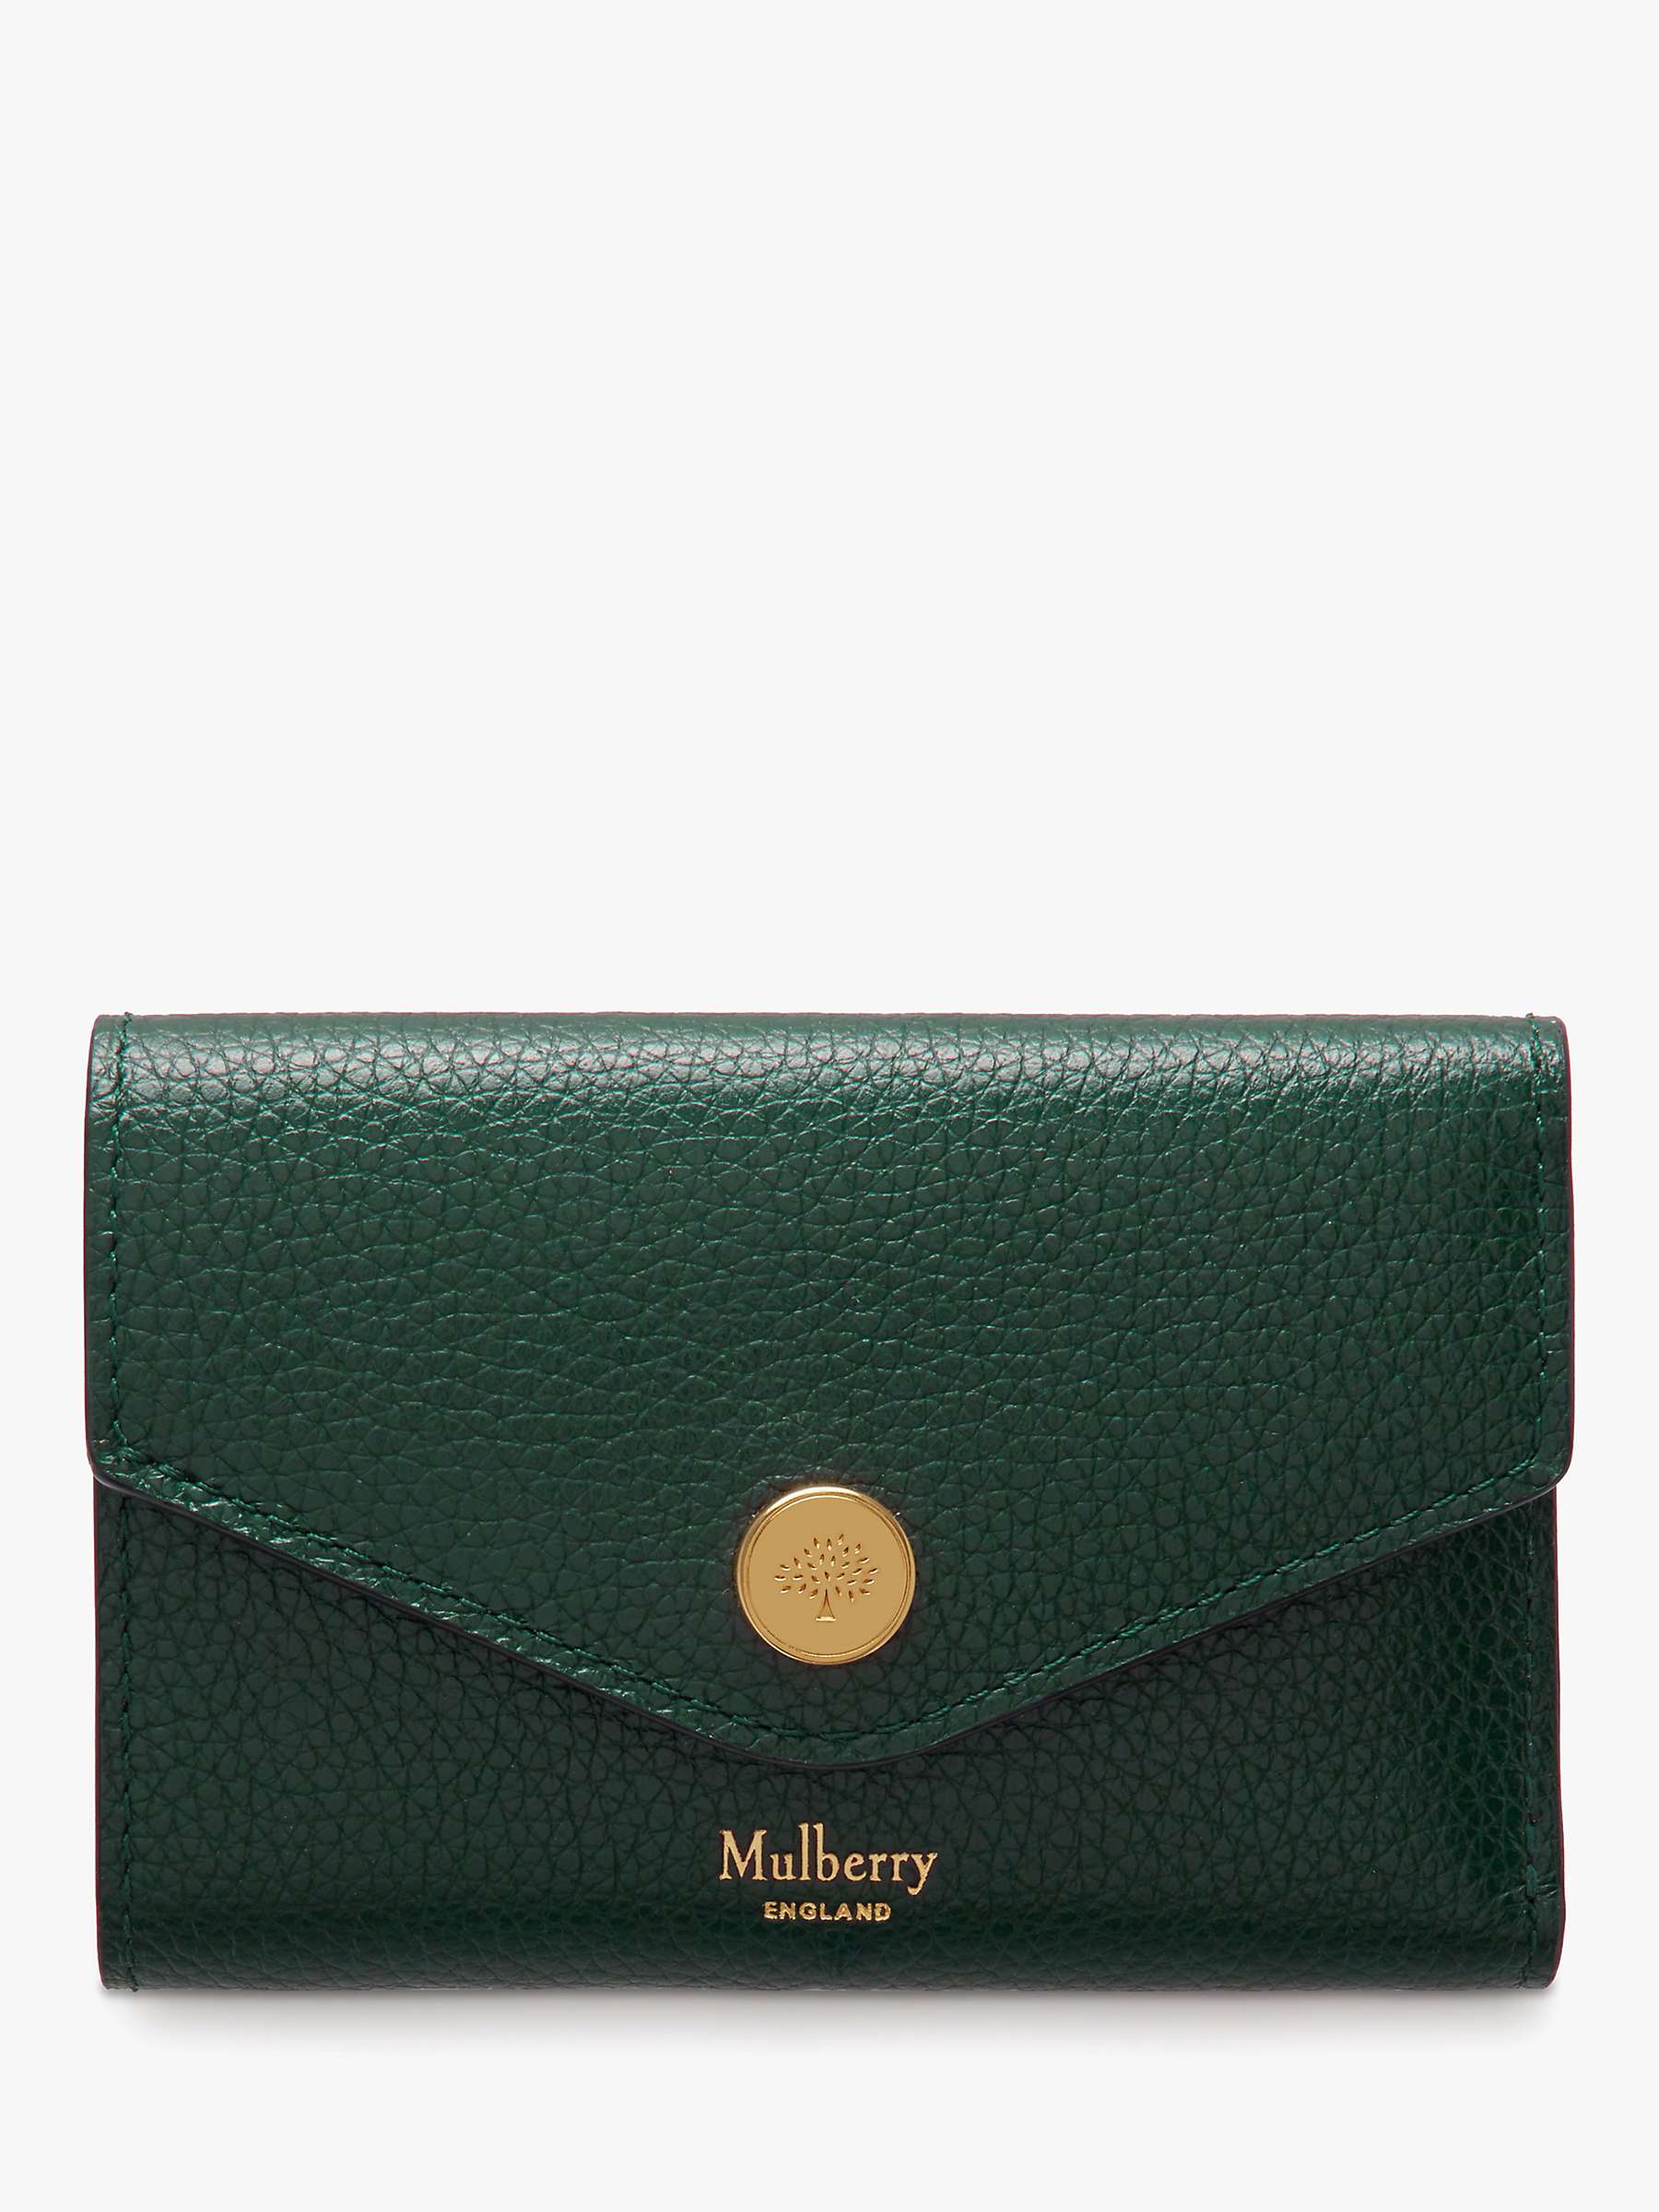 Buy Mulberry Folded Multi-Card Small Classic Grain Leather Wallet Online at johnlewis.com